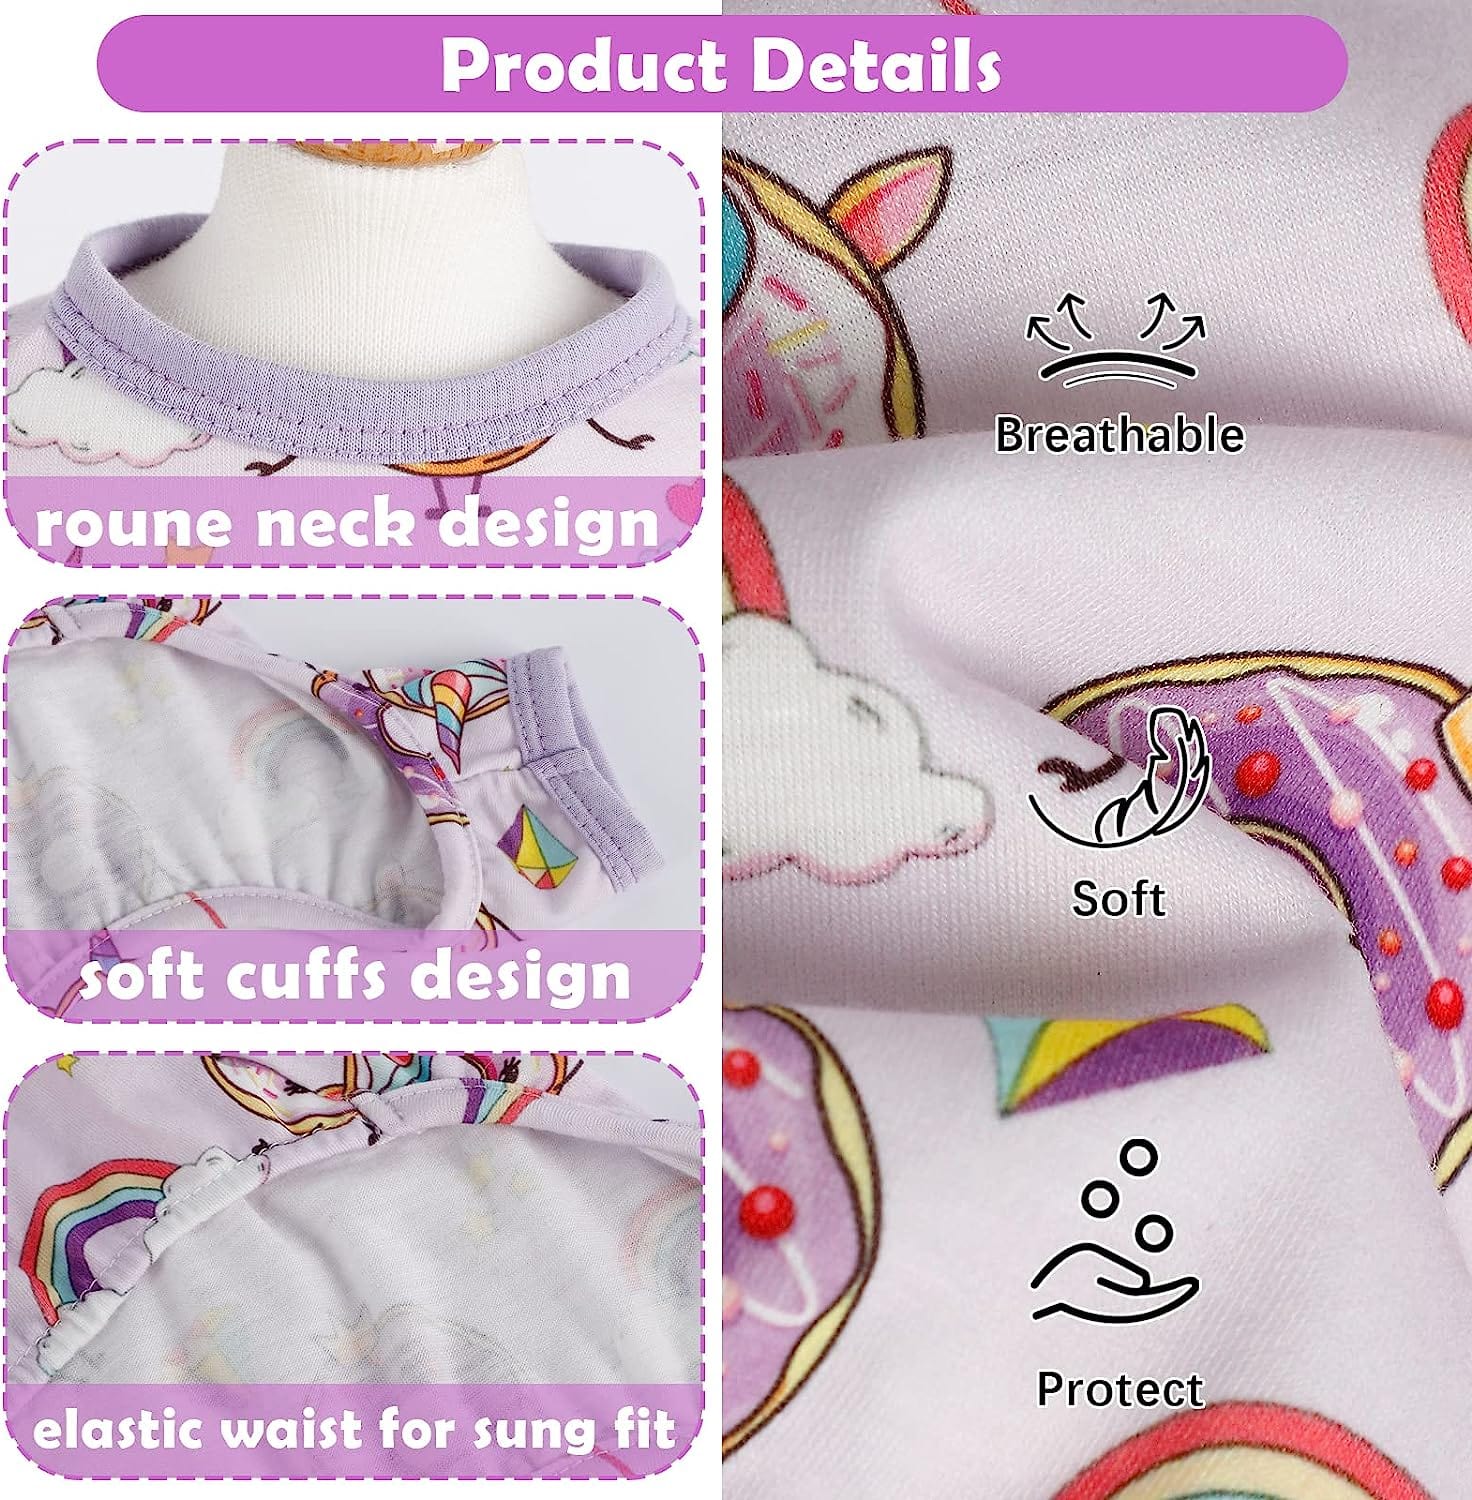 KUTKUT Small Dog Bodysuit, Dog Pjs Spring Doggie Onesies Summer Pet Jammies Dog Clothes for Puppies Small Dogs Girl, Cat Apparel Outfit For ShihTzu, Maltese, Bichon - kutkutstyle